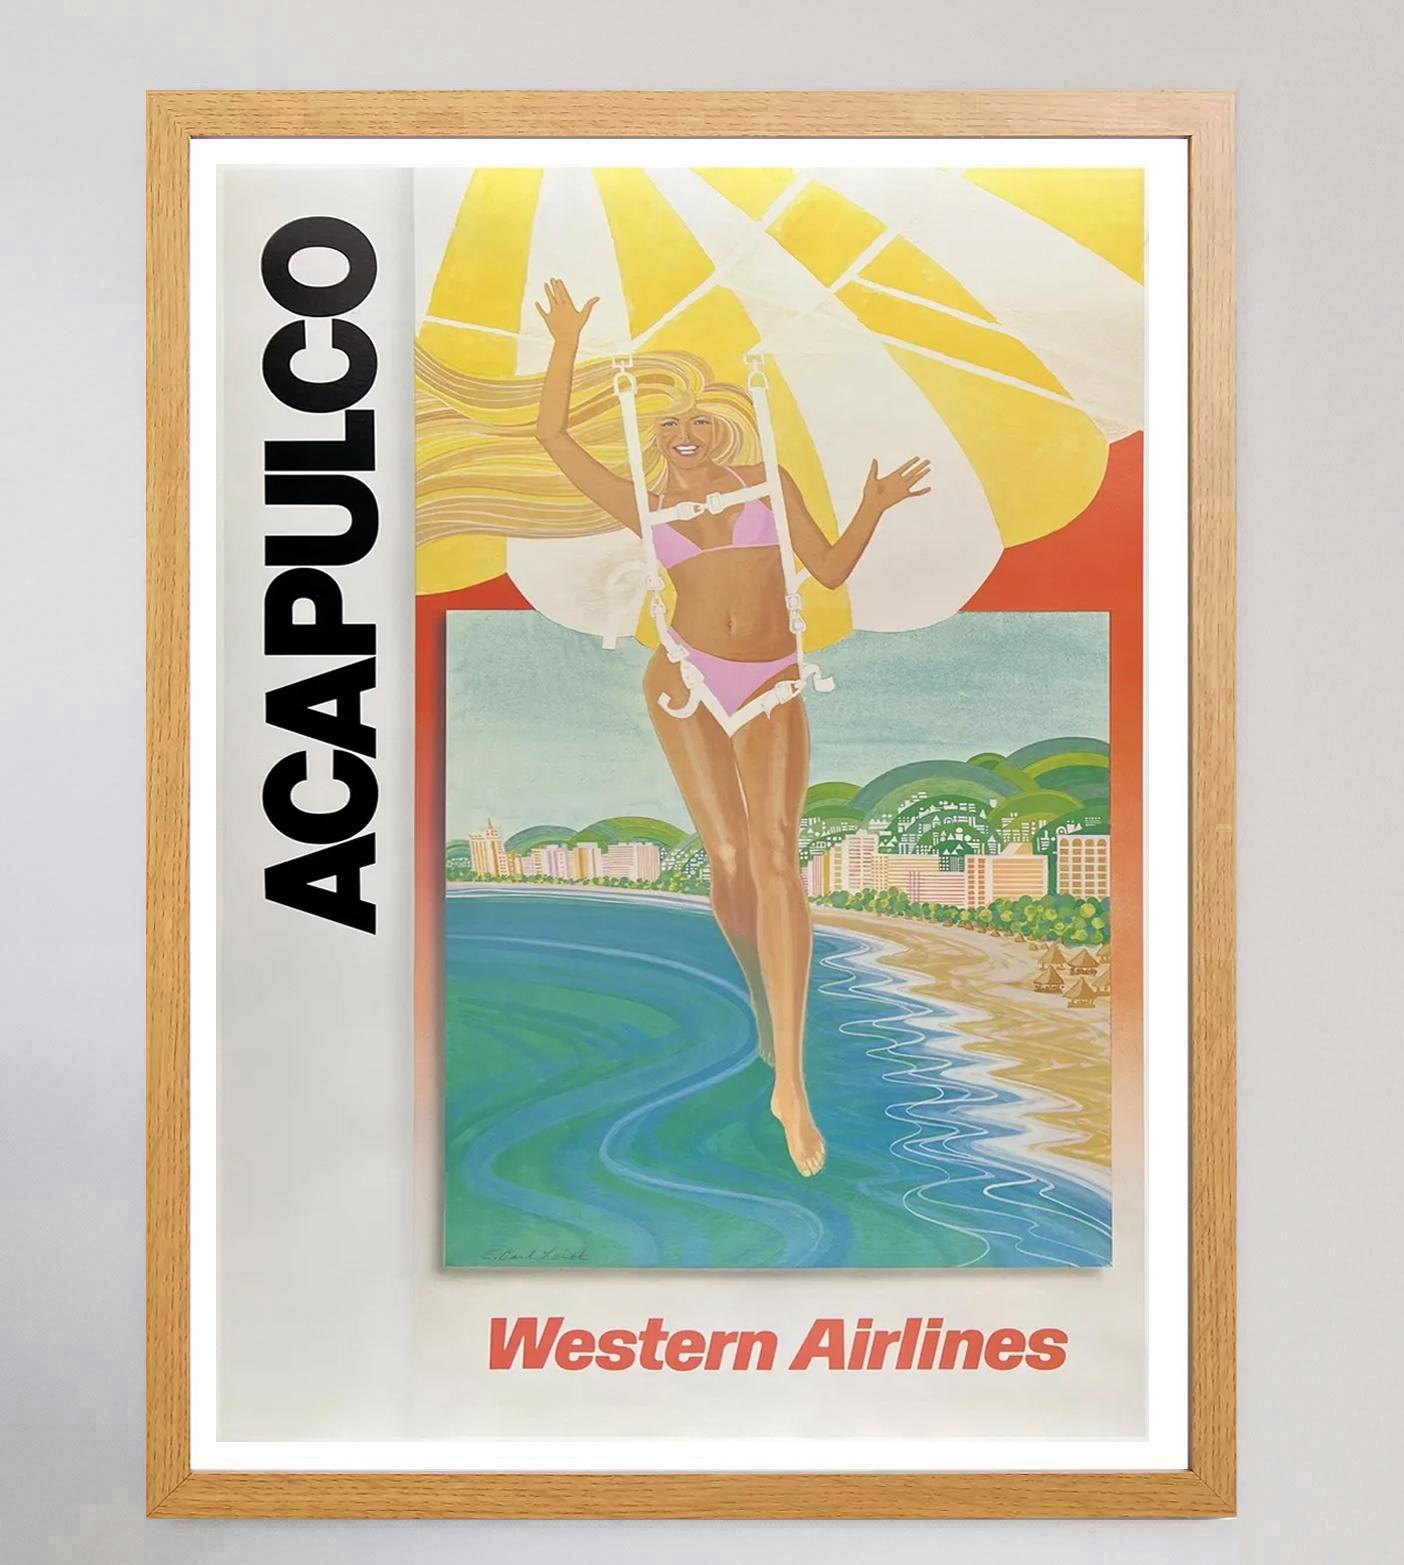 acapulco in the 80s